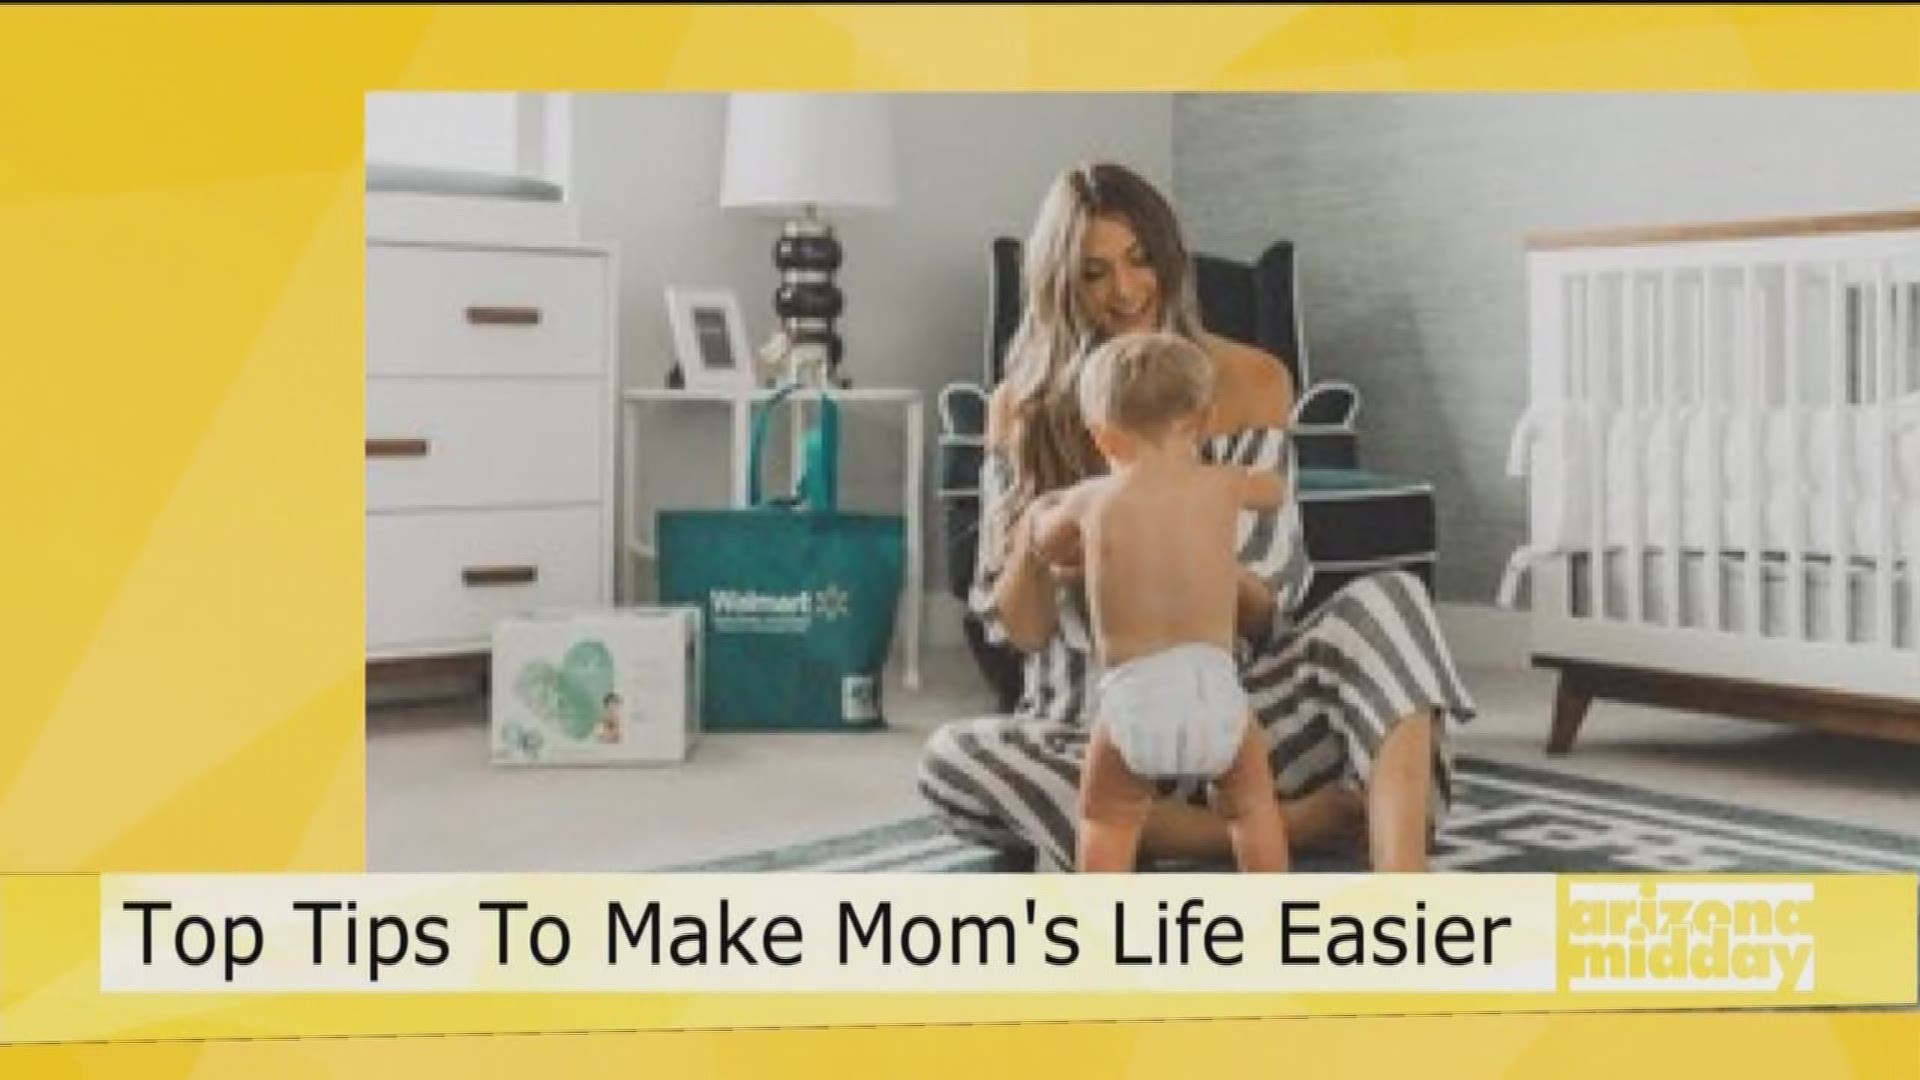 Dash of Darling Mom Blogger Caitlin Lindquist teams up with Pampers to offer tips for surviving motherhood.